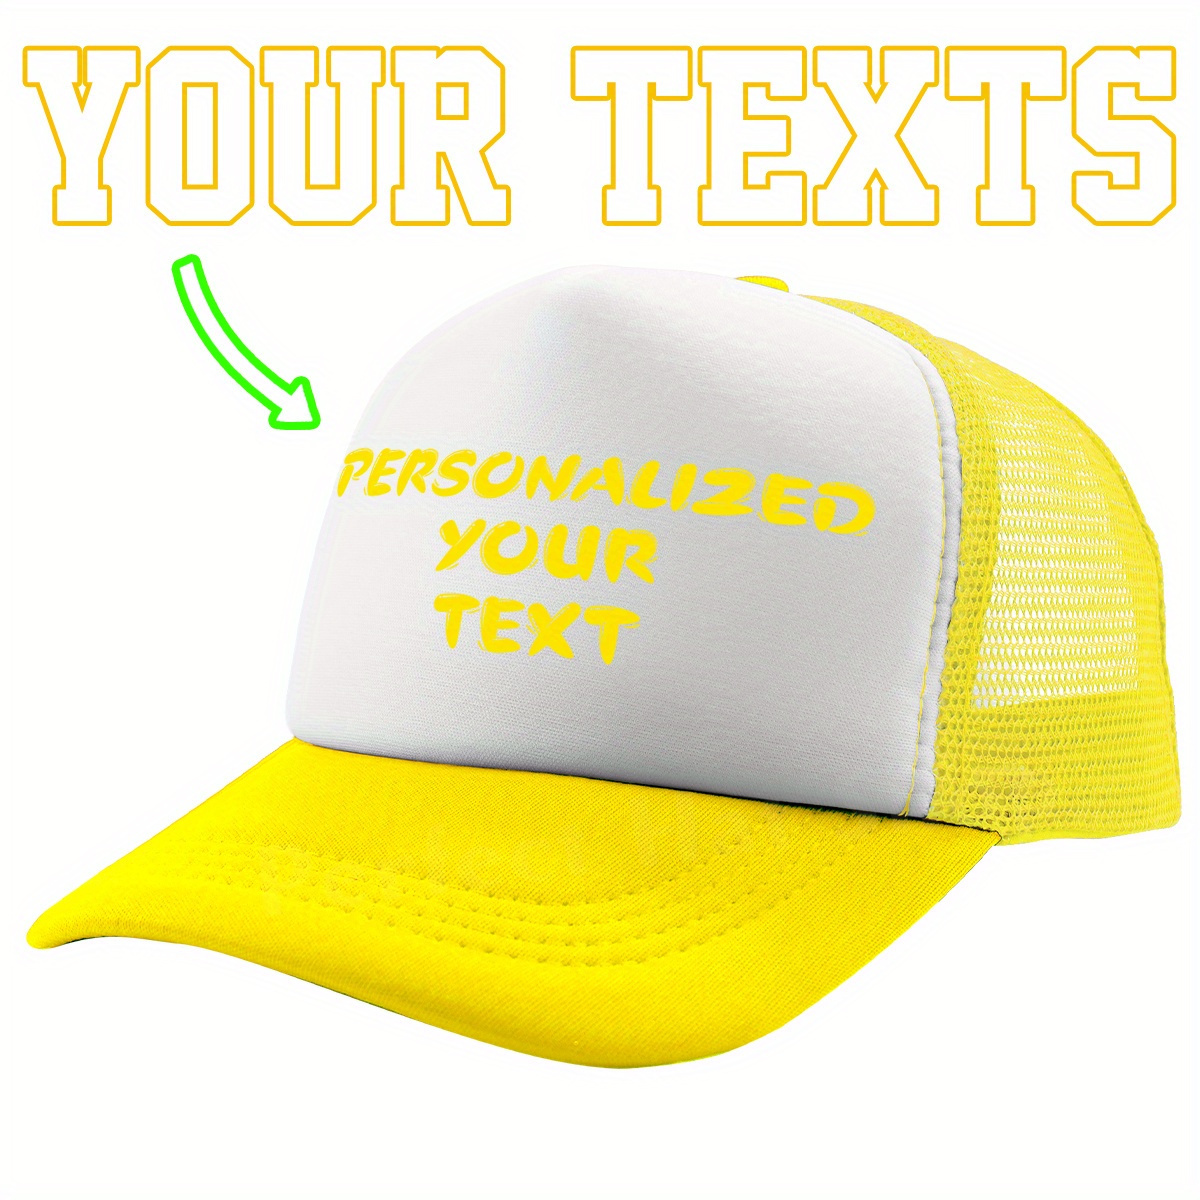 

Custom Text Print Baseball Cap - Adjustable, Breathable Mesh Trucker Hat For Men & Women, Lightweight Polyester - Perfect For Sports & Casual Wear